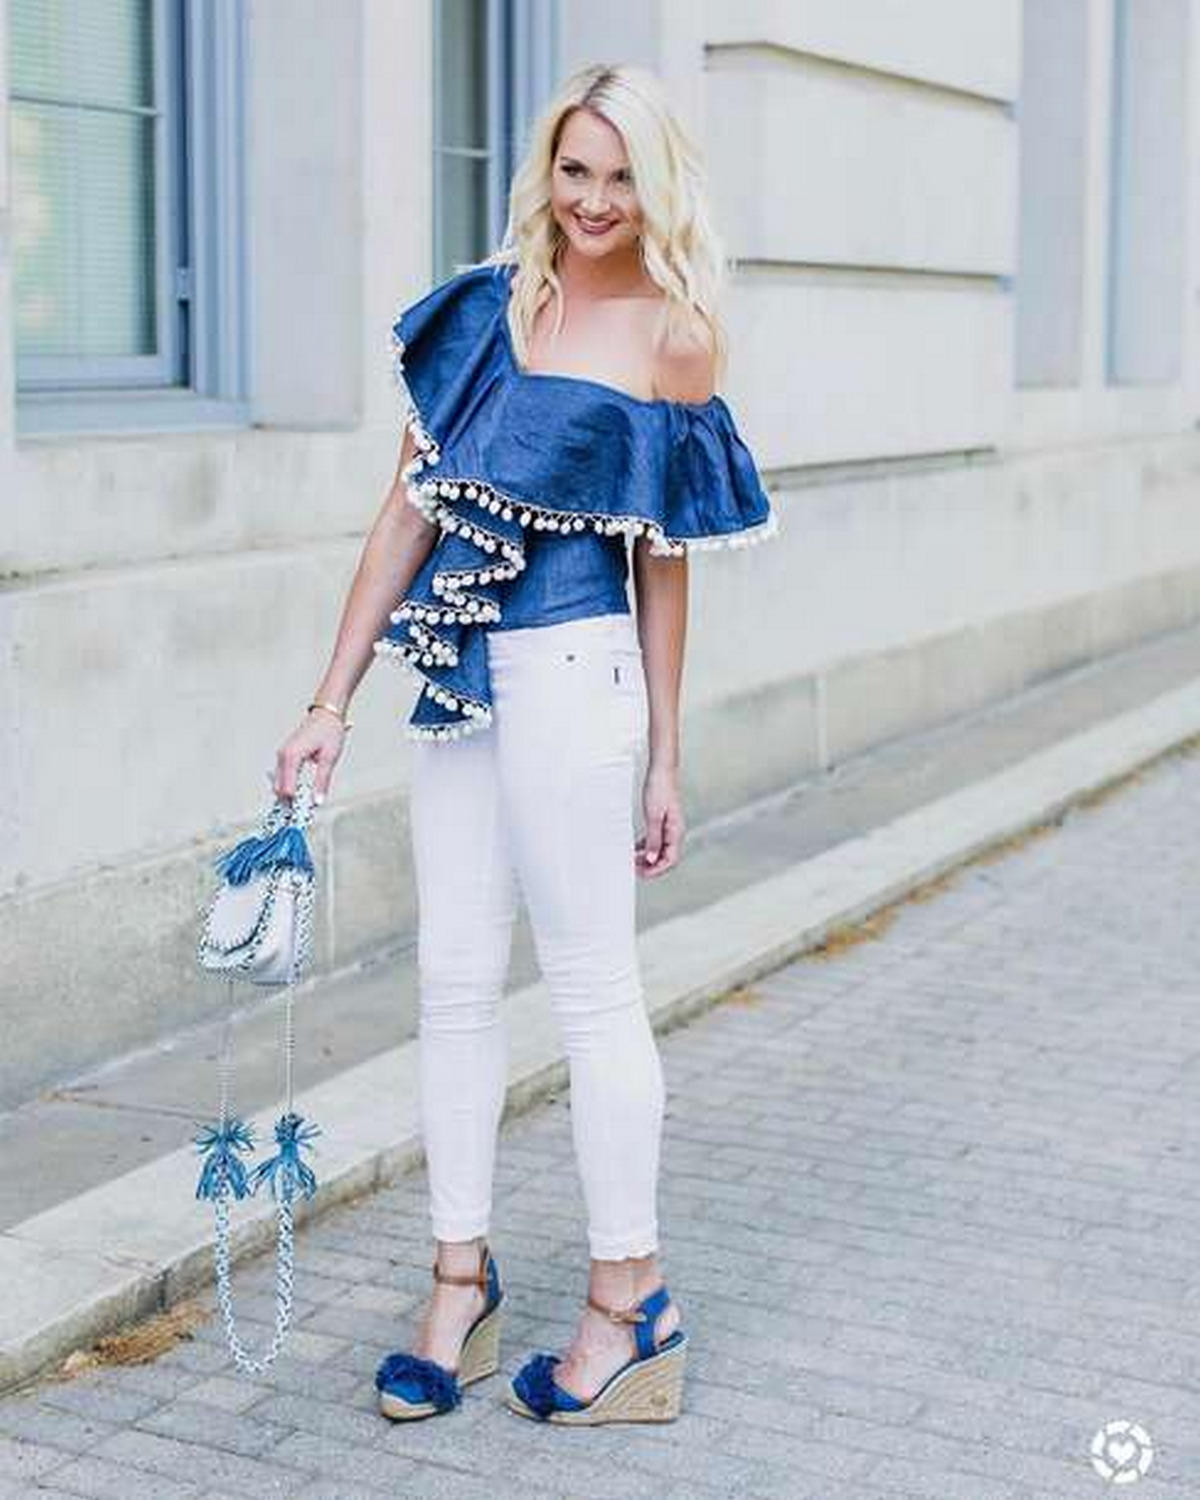 Blue Off-The-Shoulder Top, Skinny White Pants, And Blue Wedge Shoes